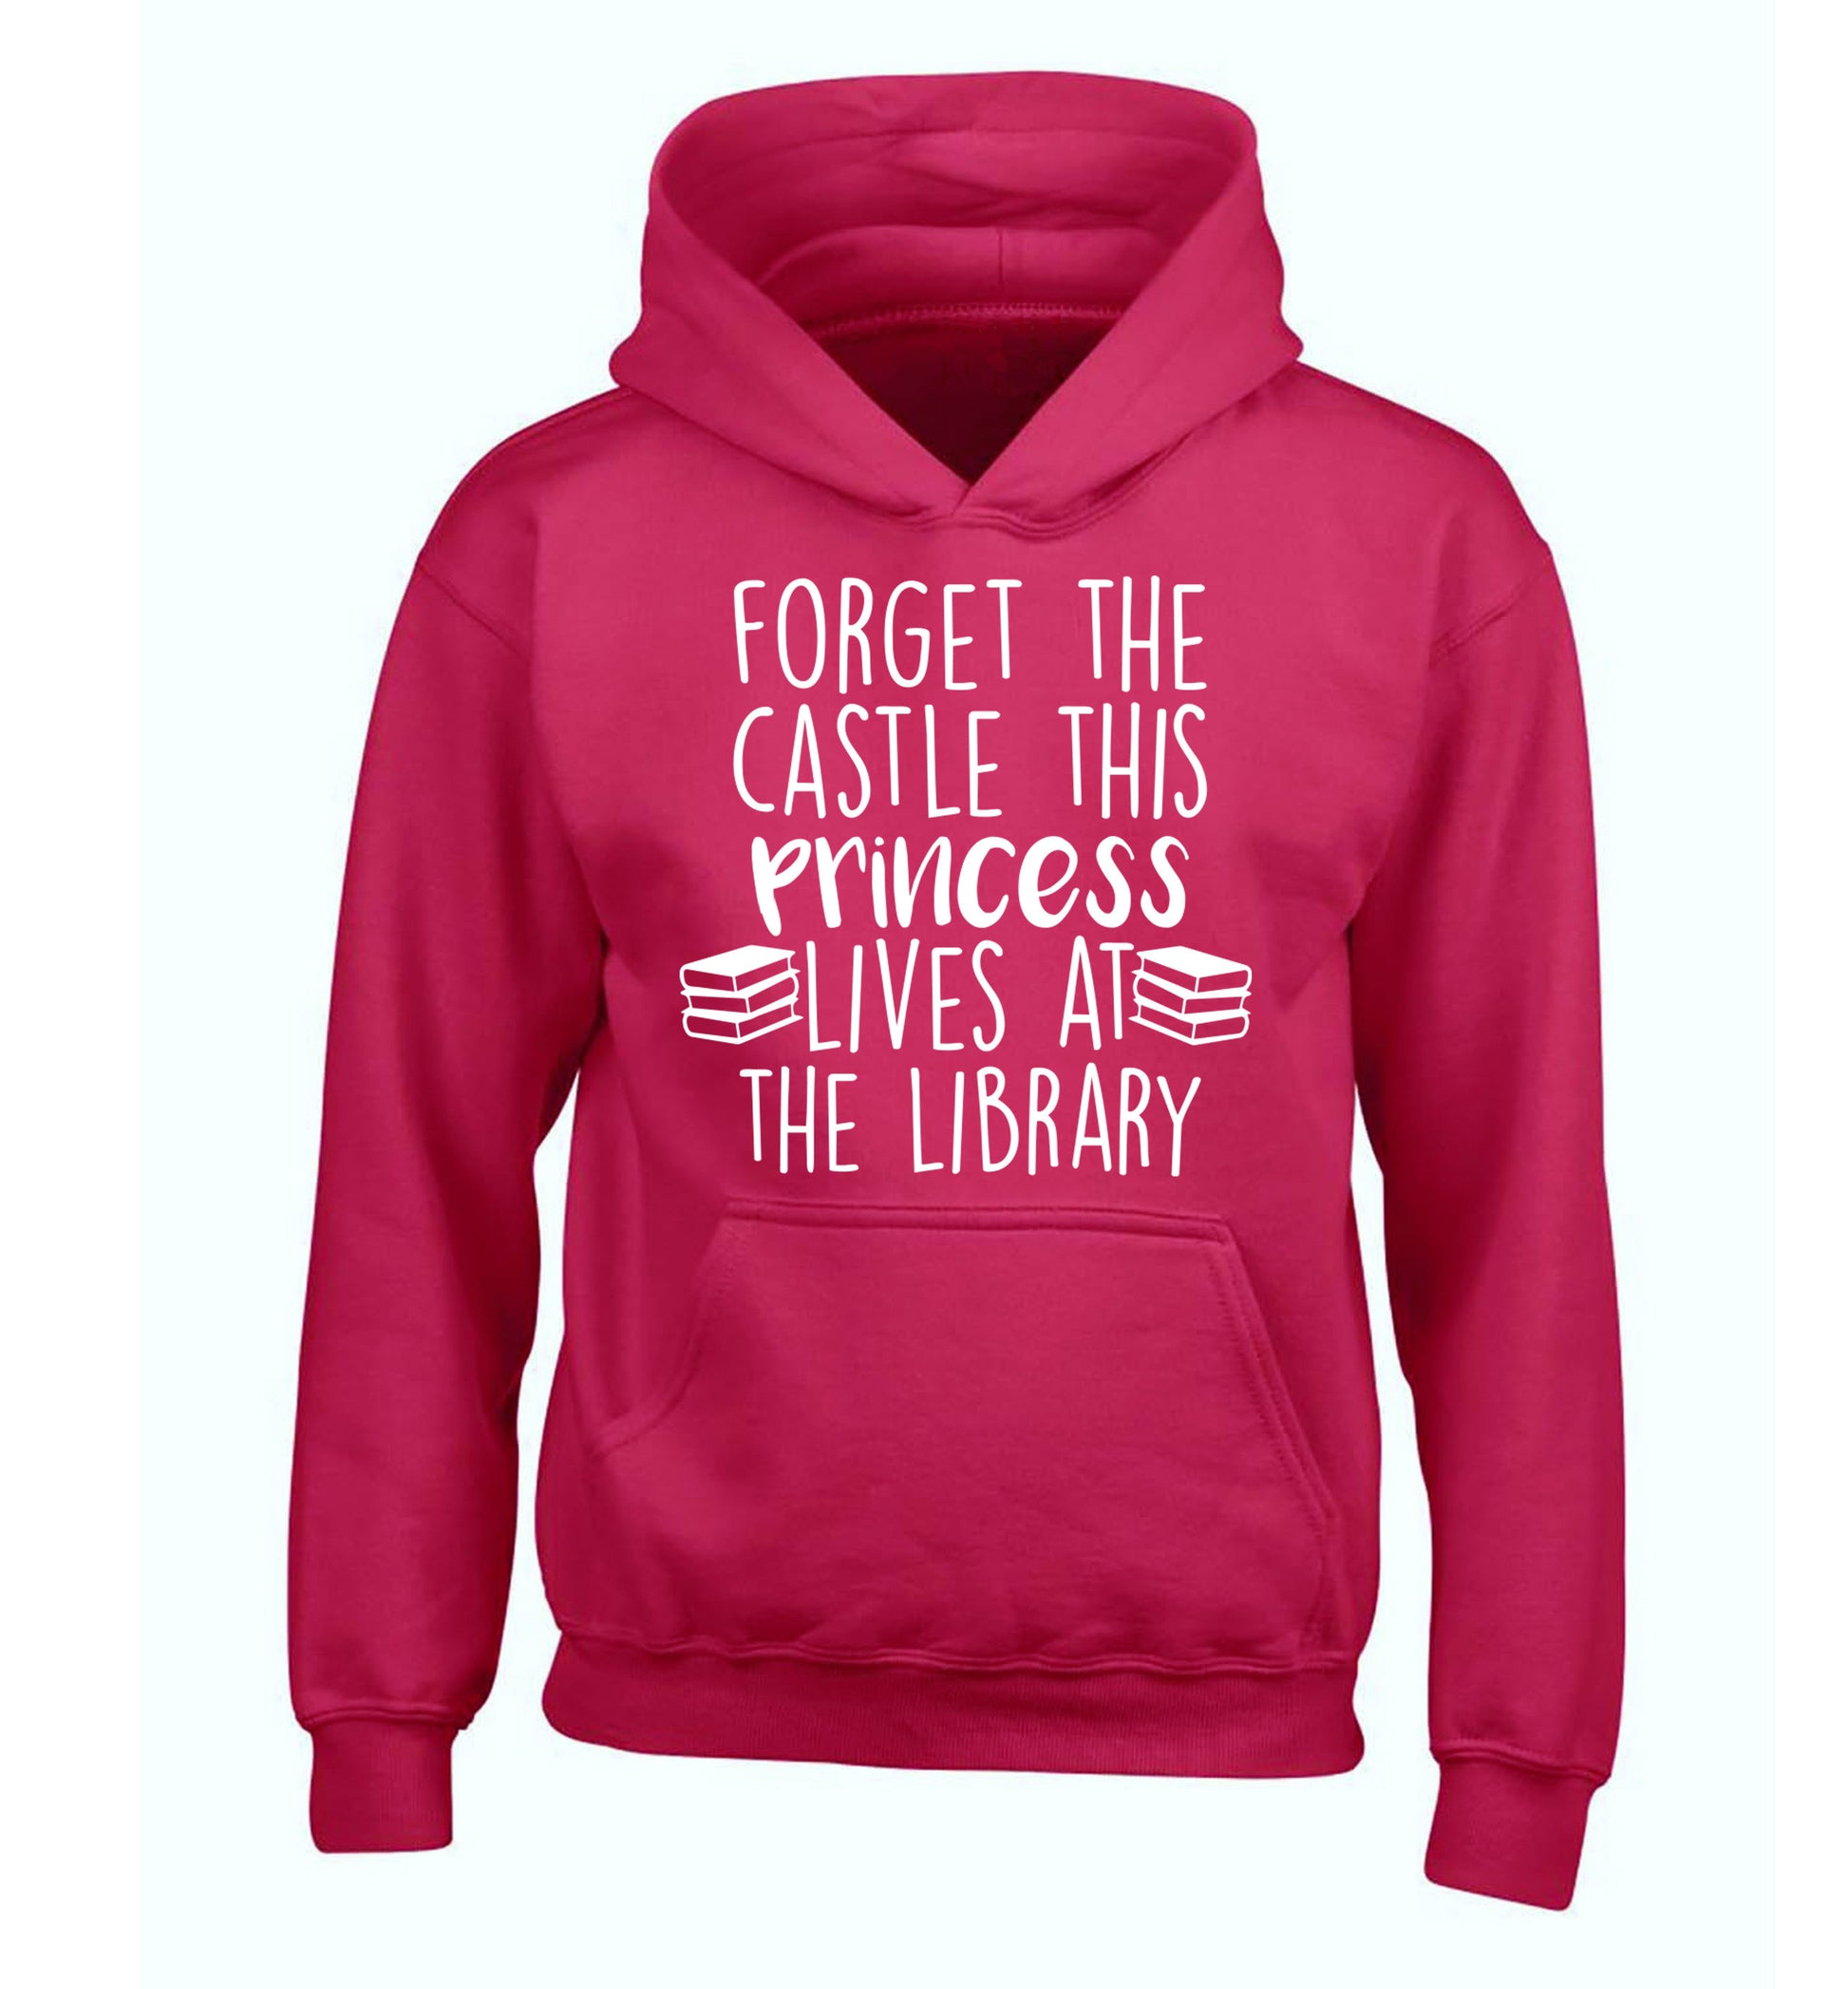 Forget the castle this princess lives at the library children's pink hoodie 12-14 Years